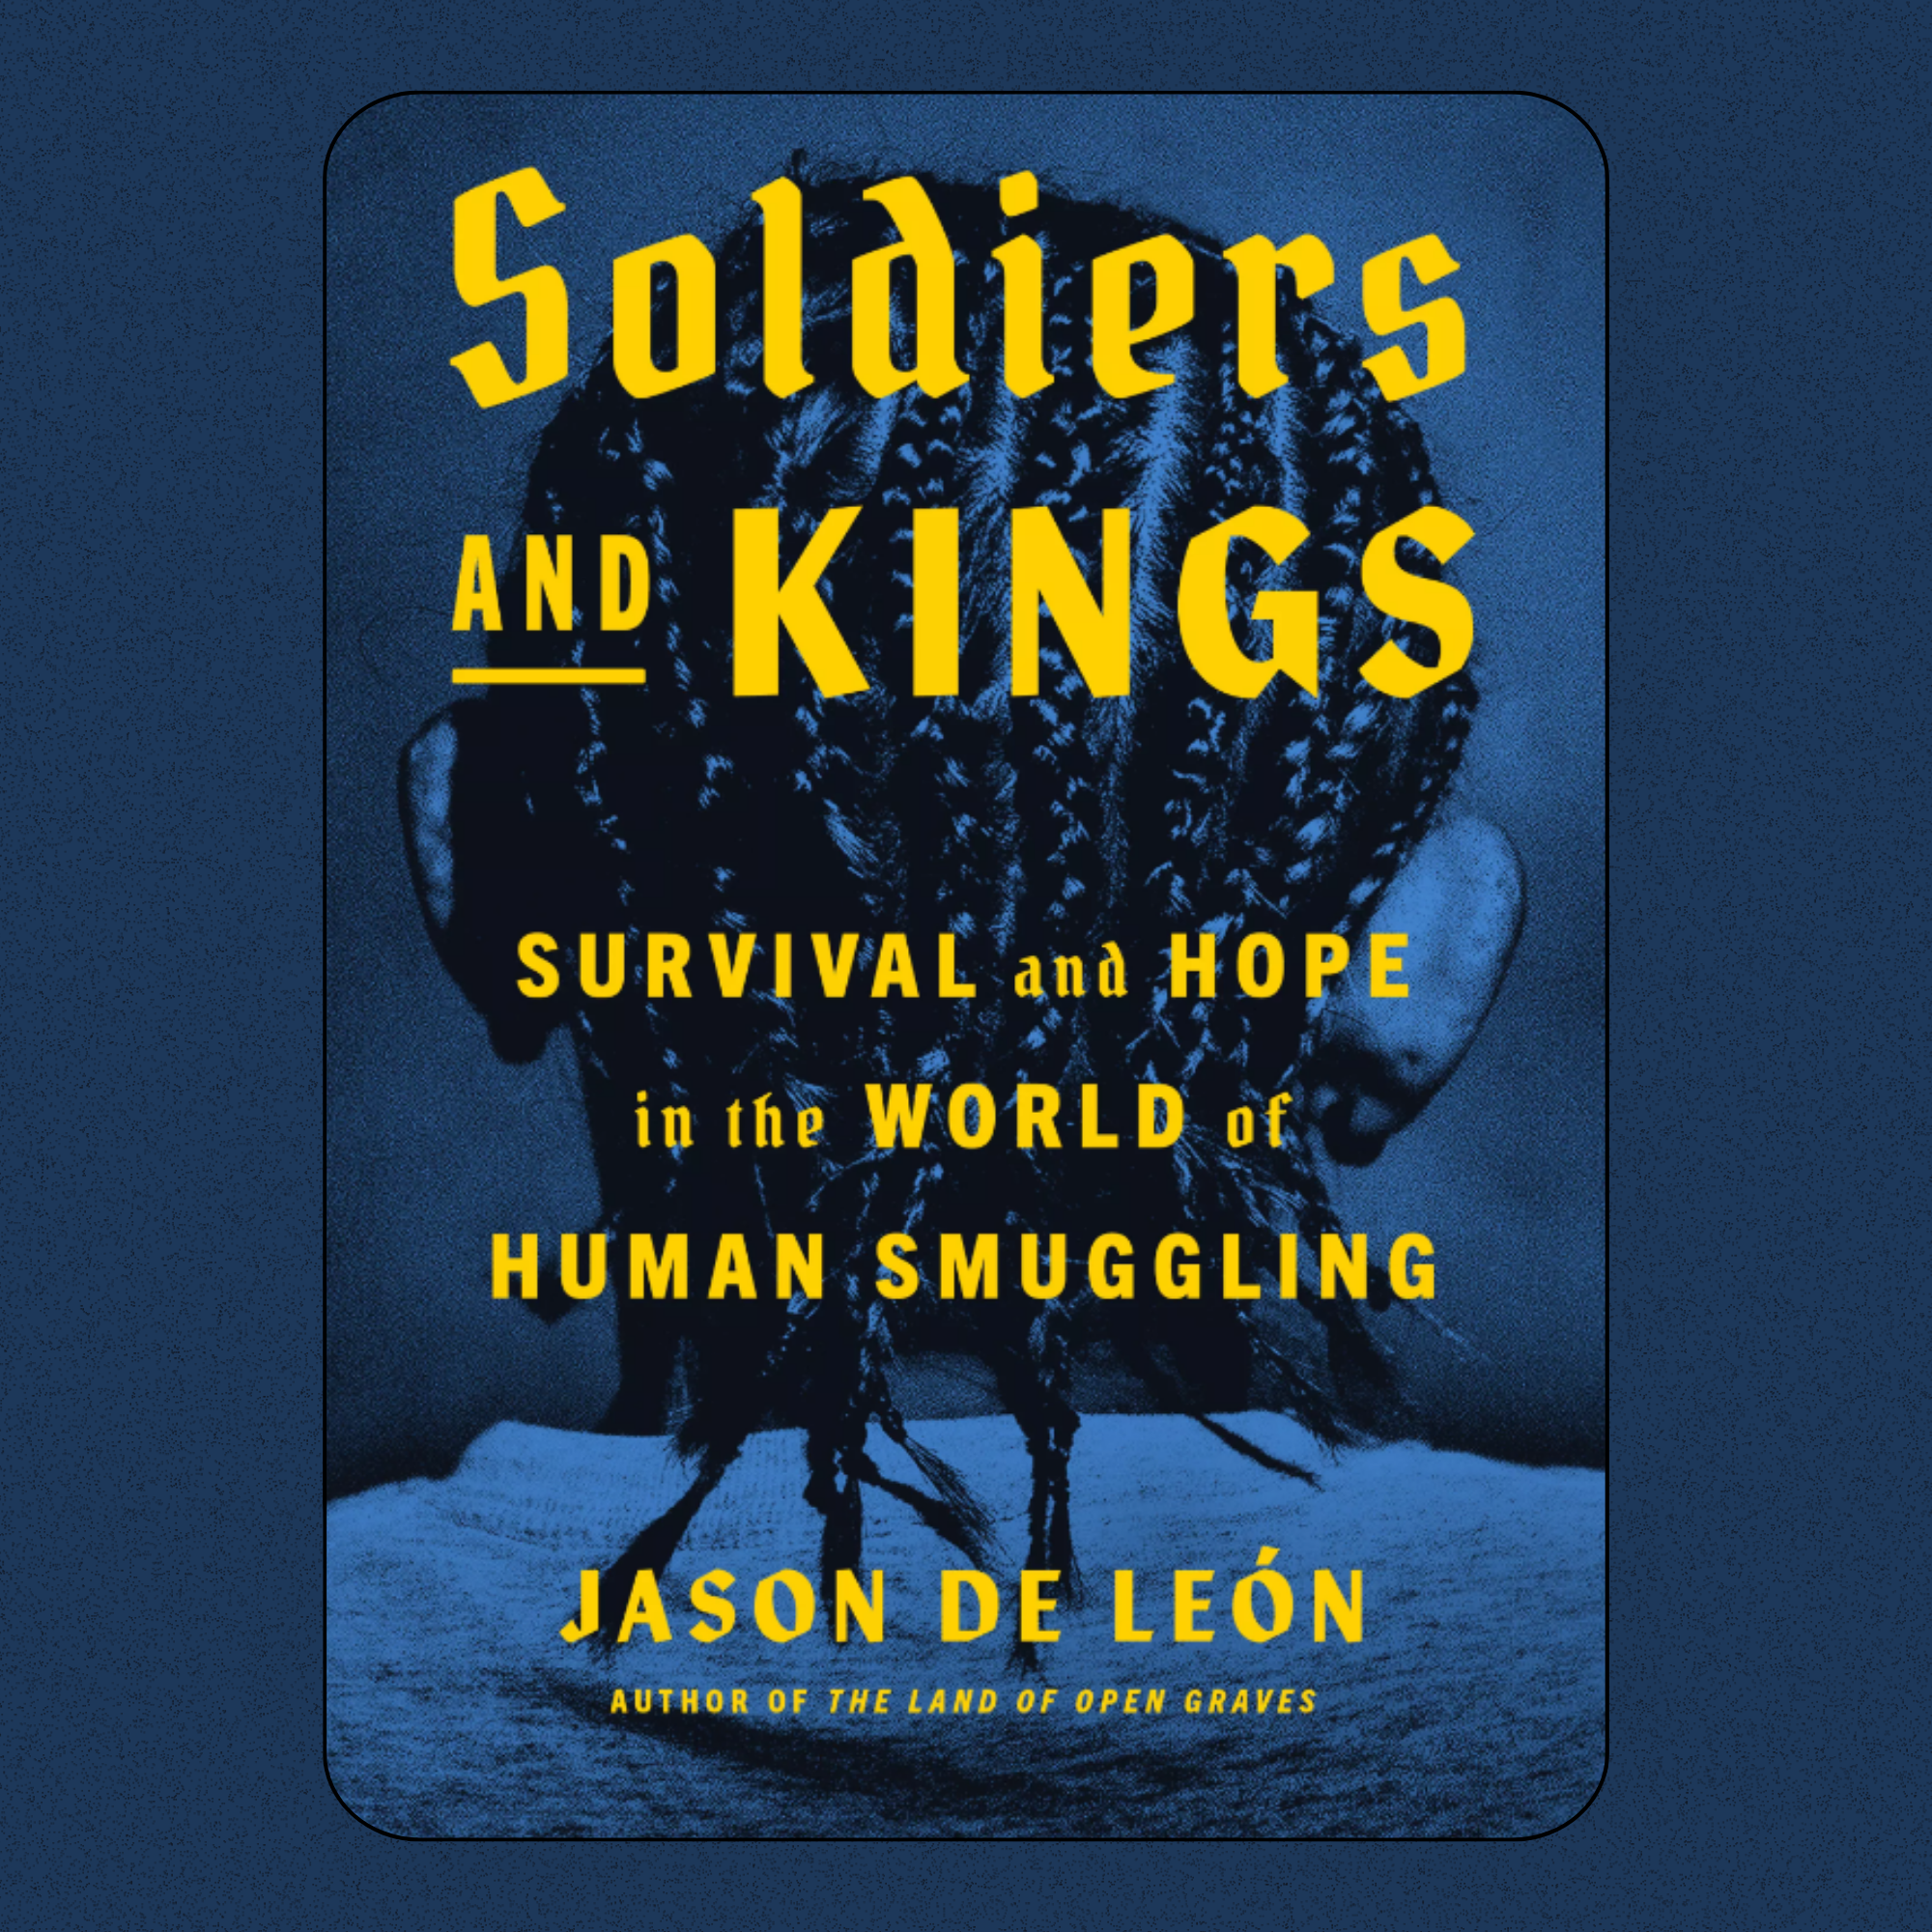 Blue graphic square featuring the Soldiers and Kings: Survival and Hope in the World of Human Smuggling book cover art.